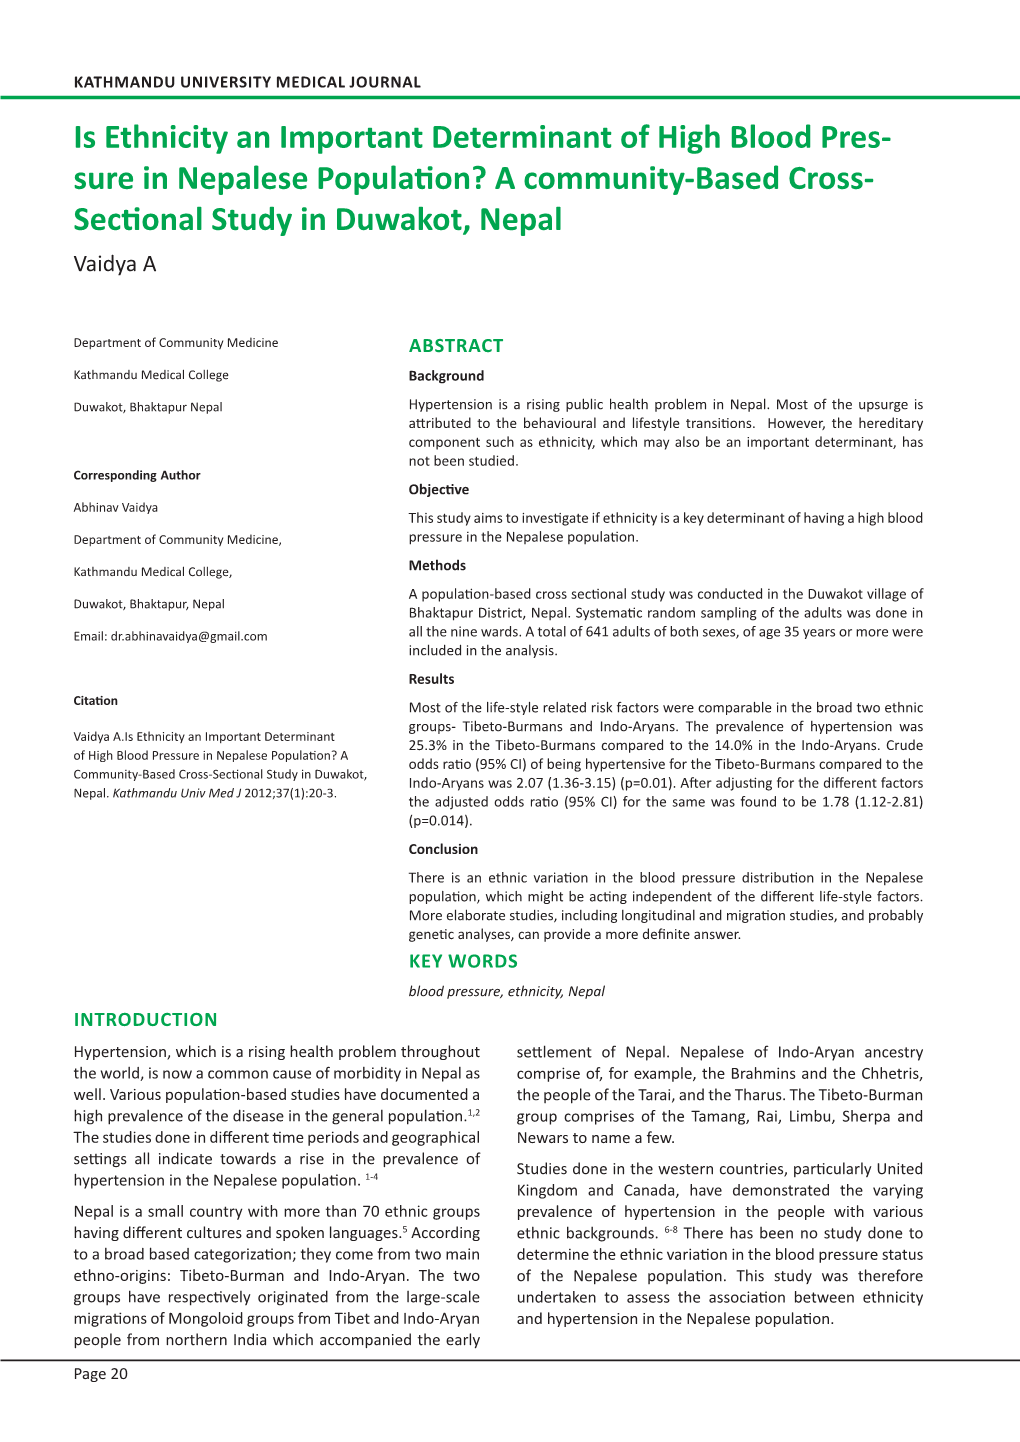 Is Ethnicity an Important Determinant of High Blood Pressure in Nepalese Population?